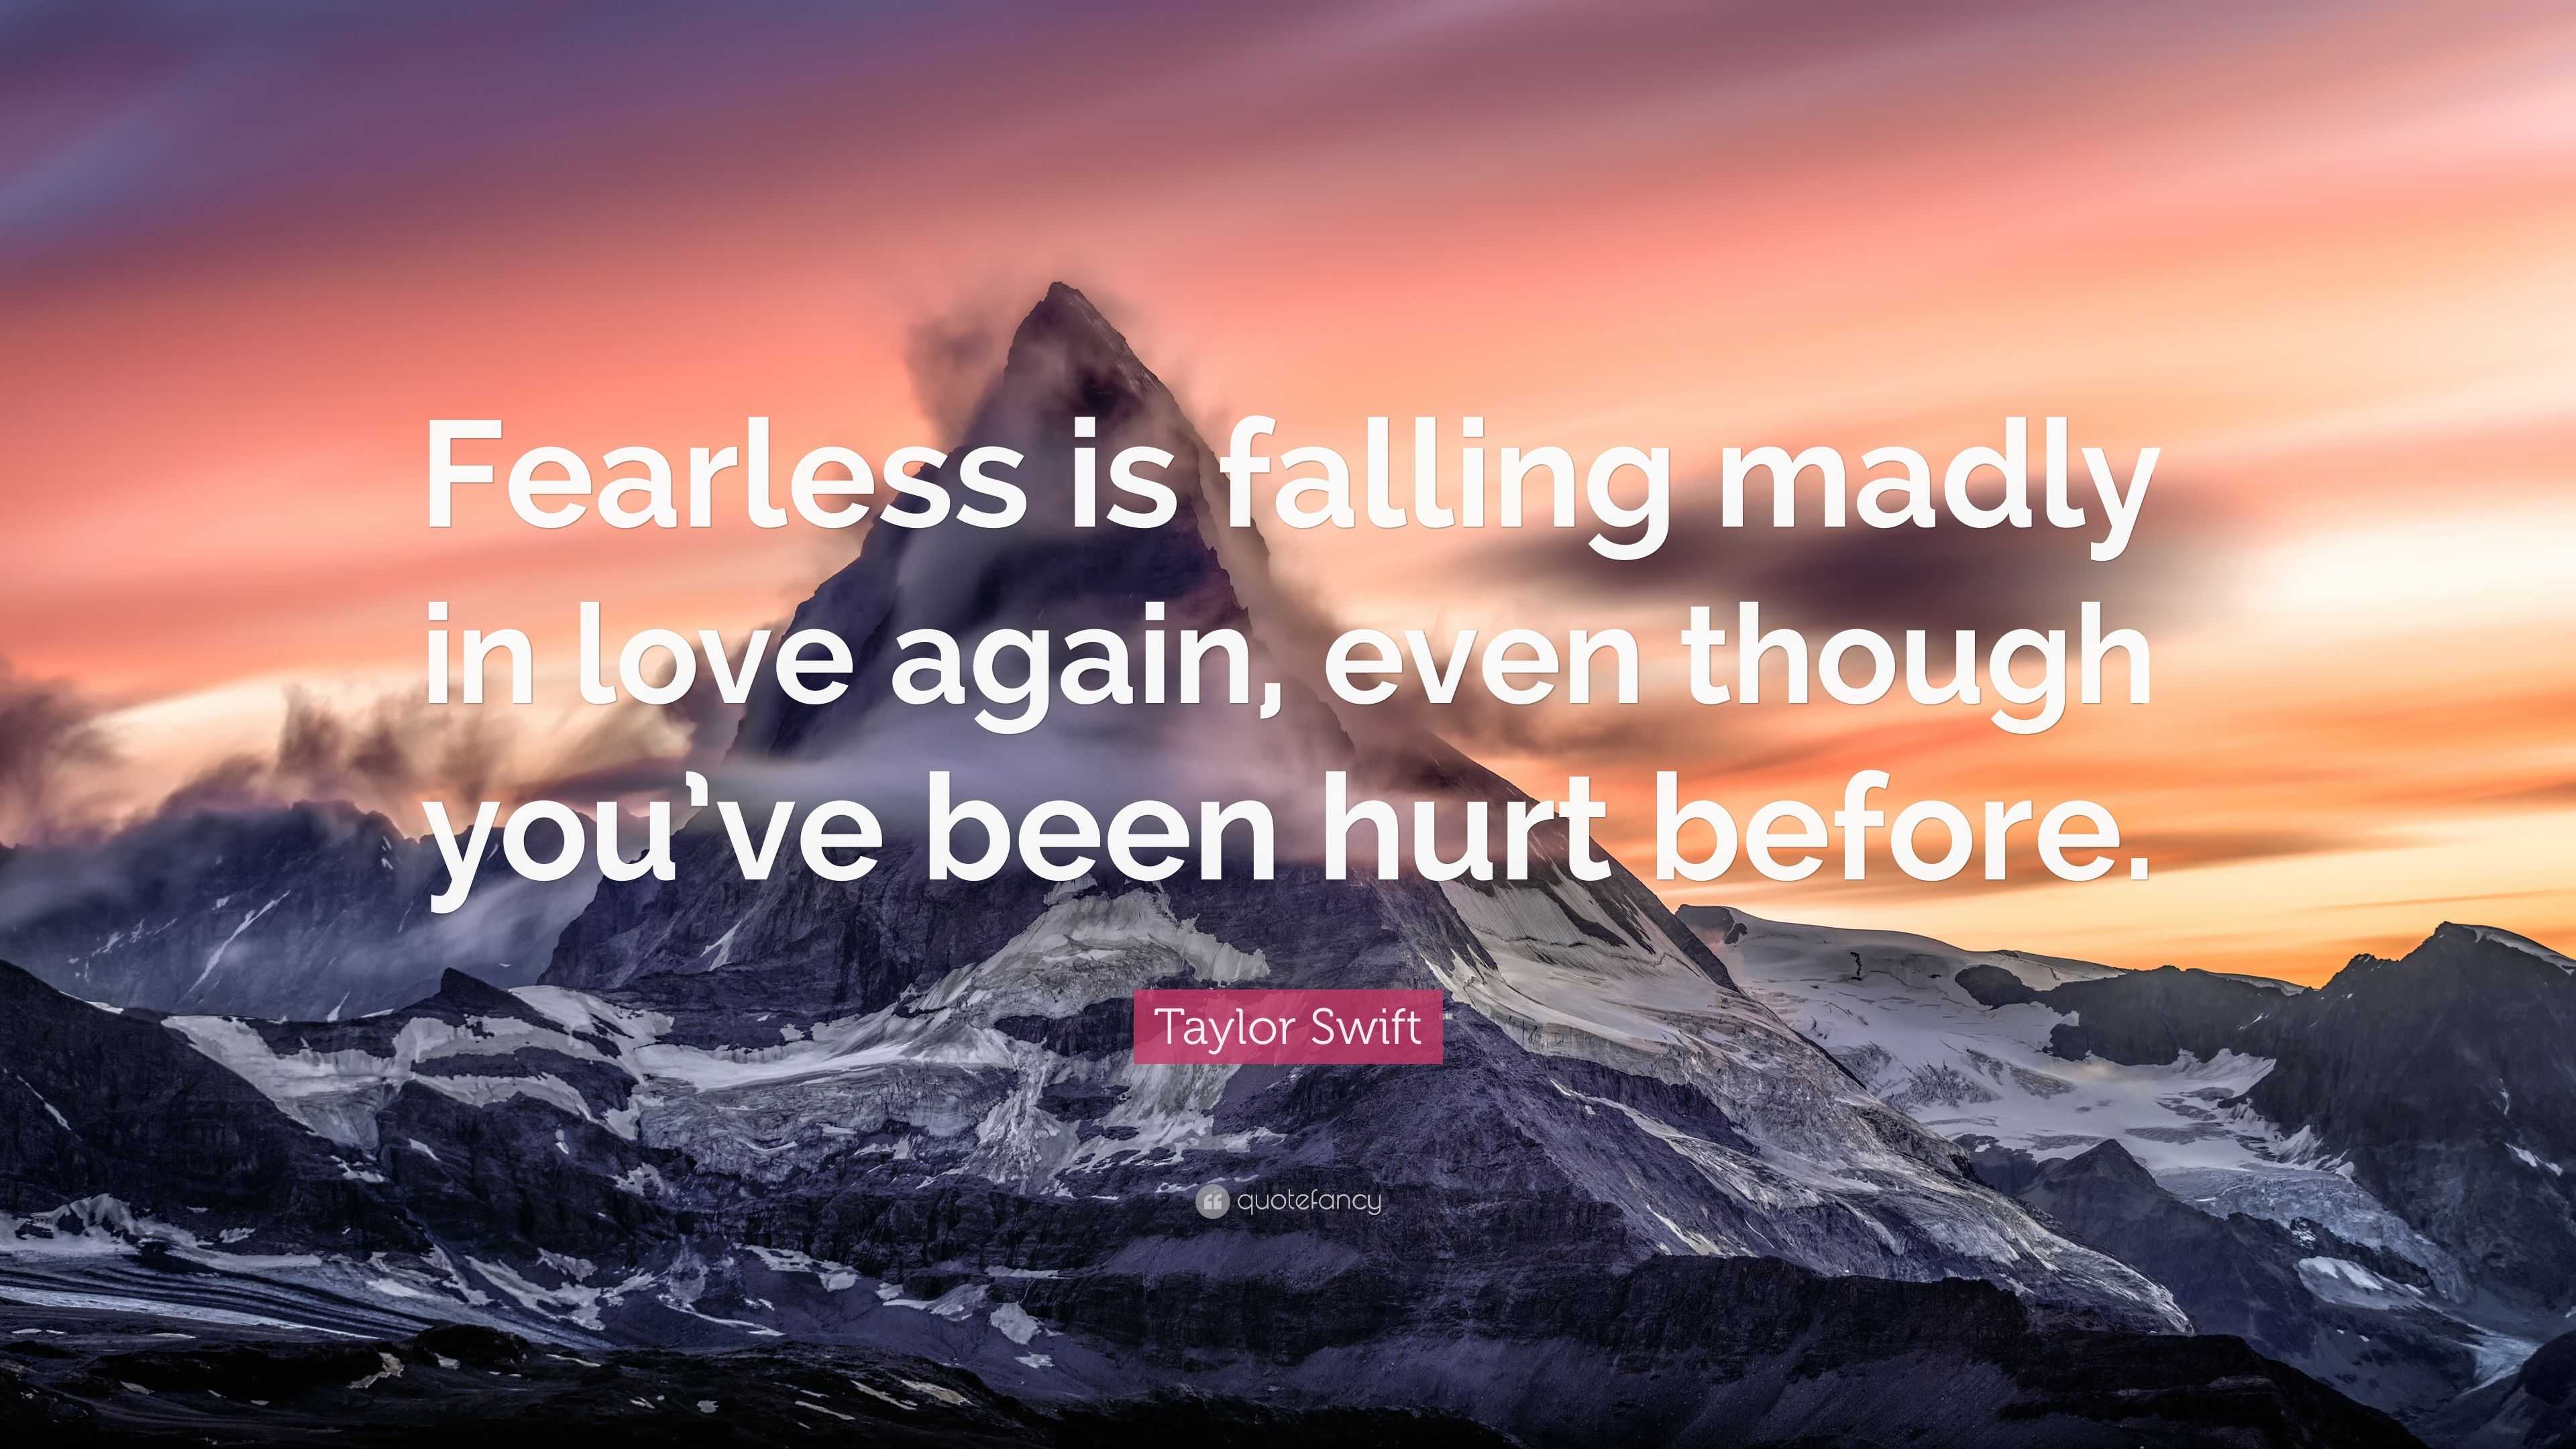 Taylor Swift Quote “Fearless is falling madly in love again even though you